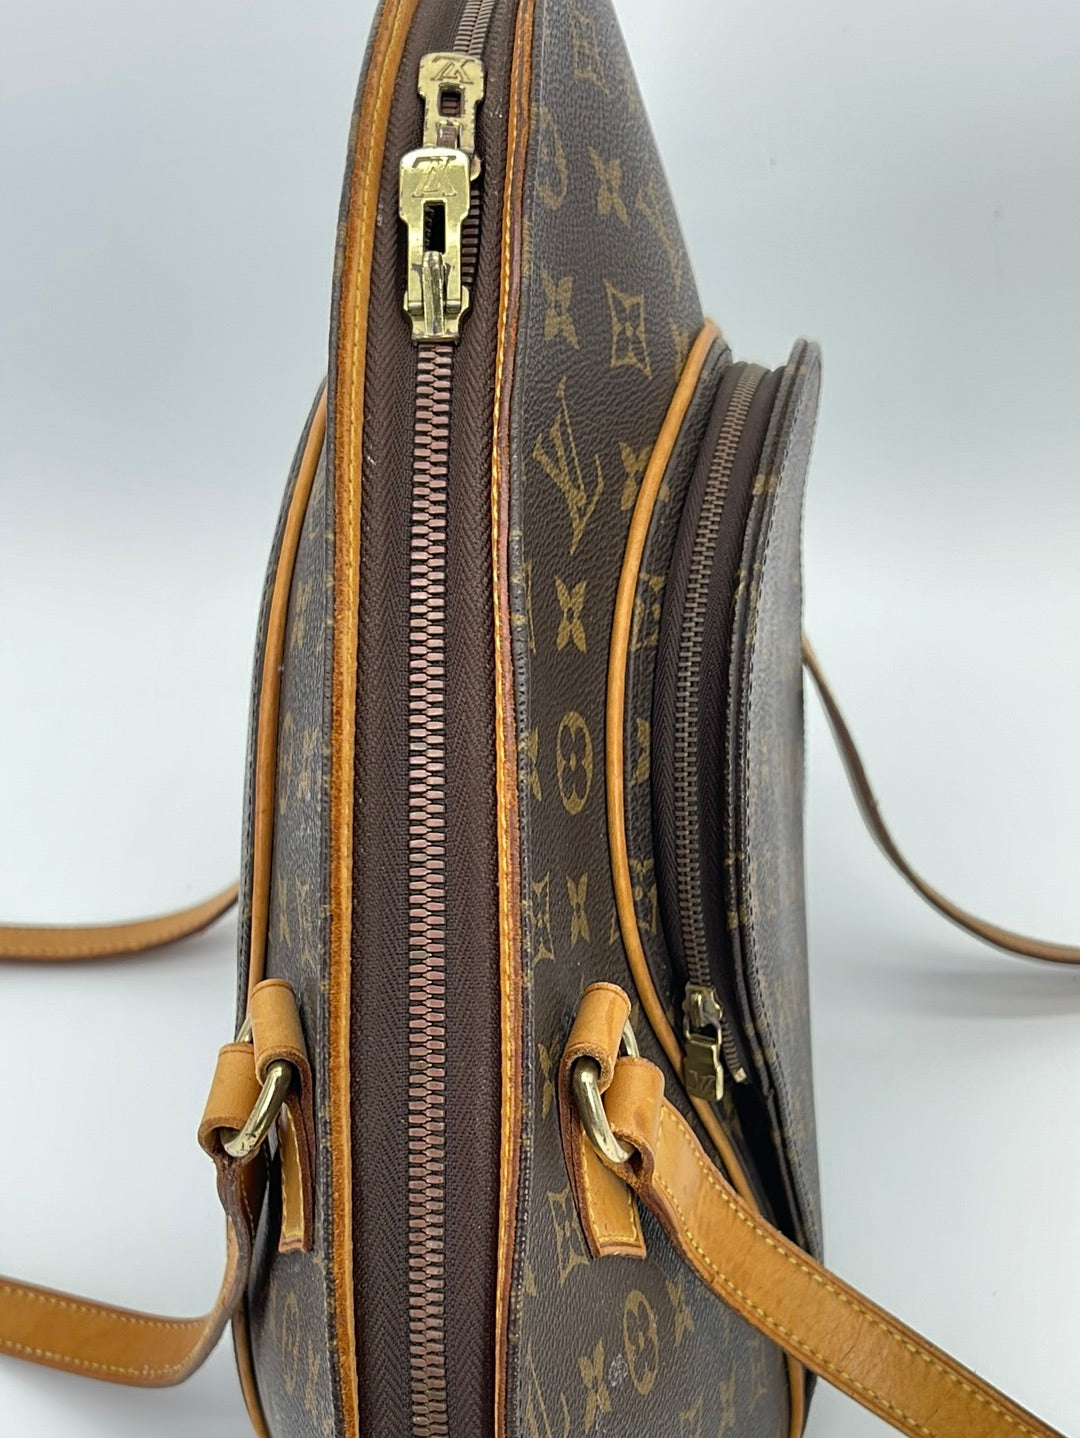 Sold at Auction: Louis Vuitton Ellipse PM bag in monogram. Retailed for  approximately $1125.